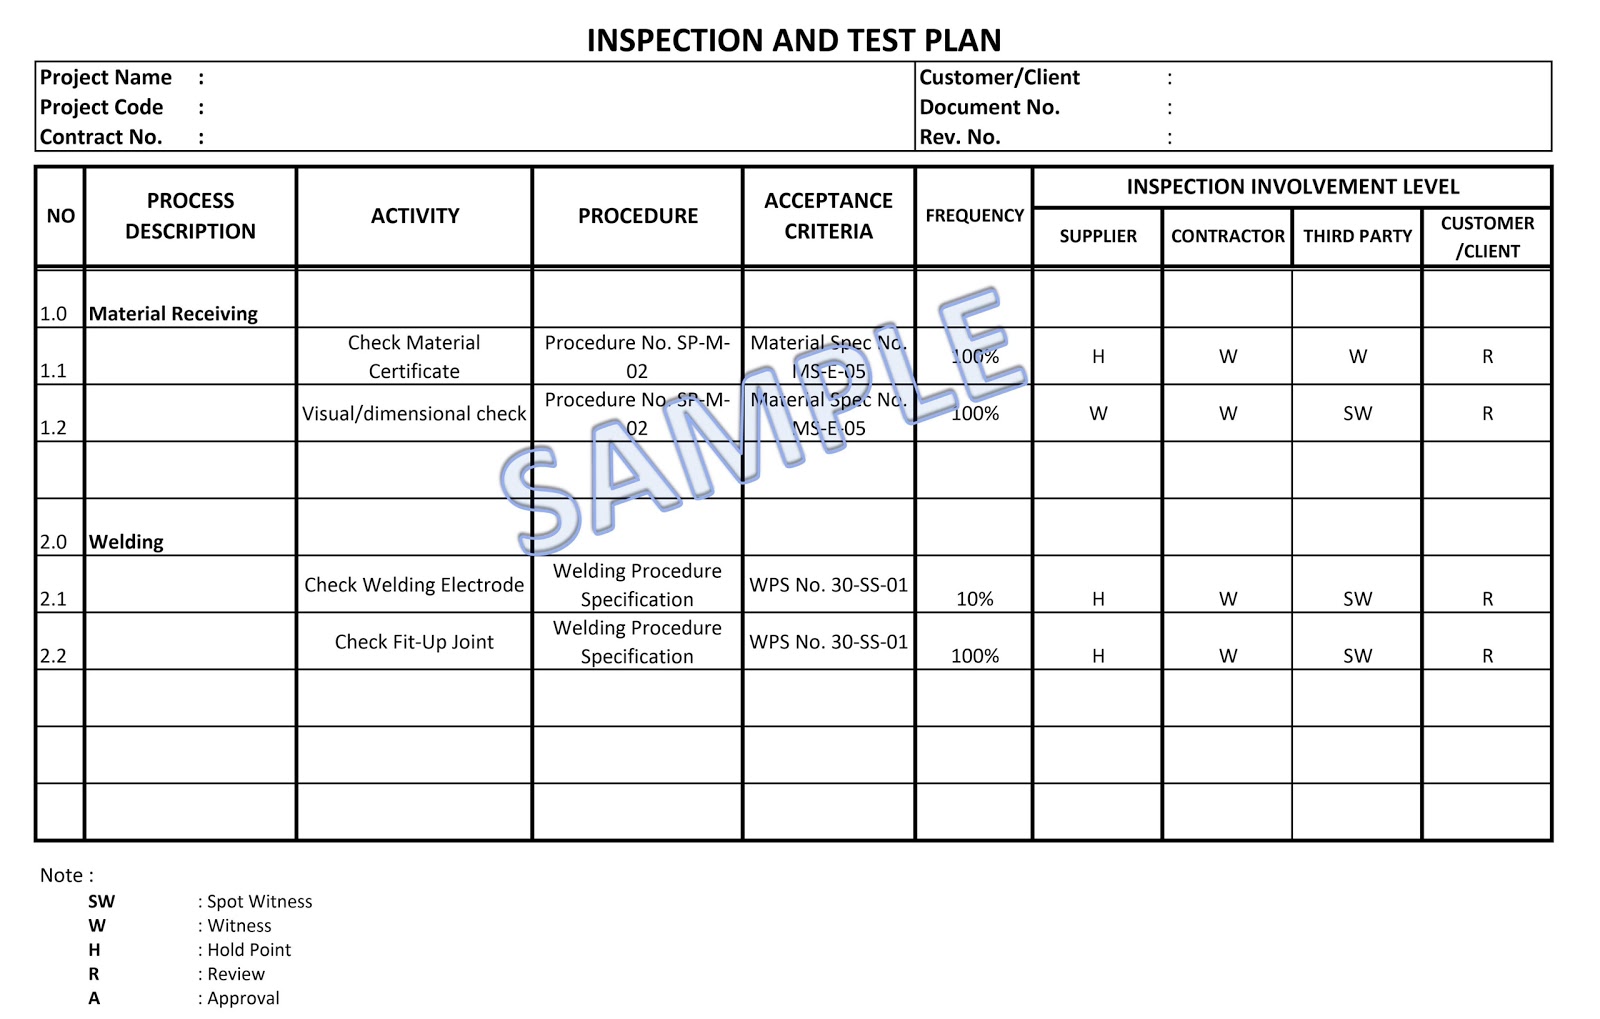 INSPECTION AND TEST PLAN (ITP) ROLE IN PROJECT QUALITY 